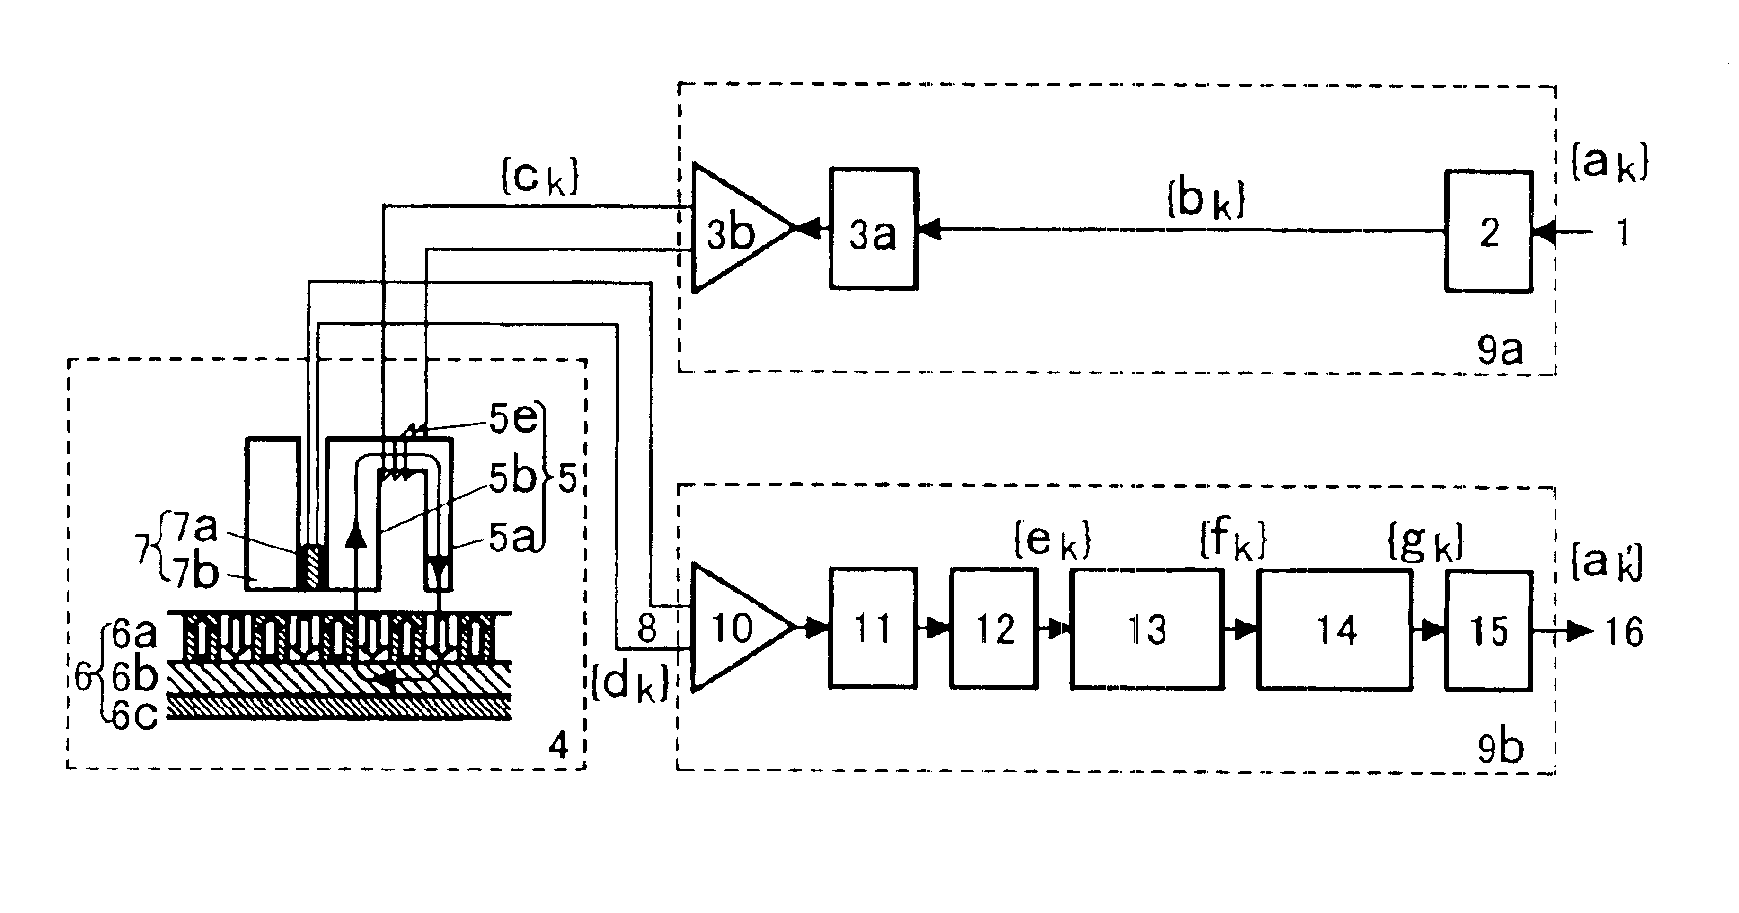 Device and signal processing circuit for magnetic recording, magnetic recording apparatus